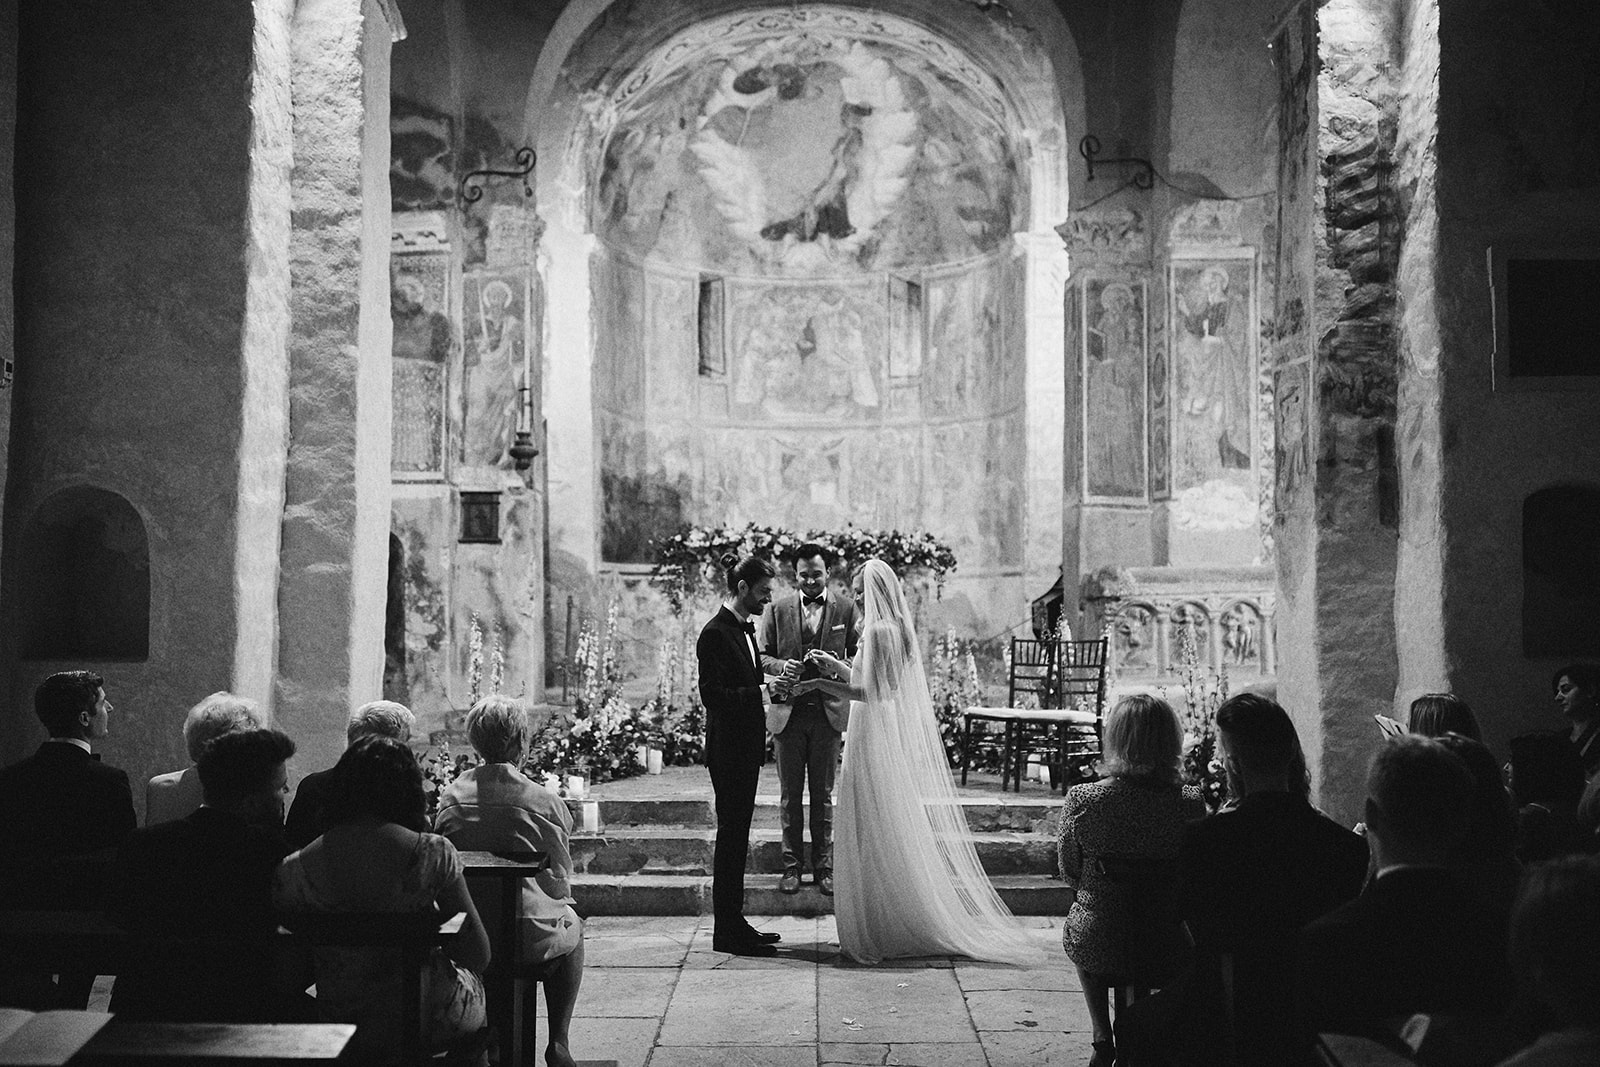 This beautiful wedding took place in Abbazia San Pietro in Valle, nestled in the hills of Umbria near Terni, Italy. 